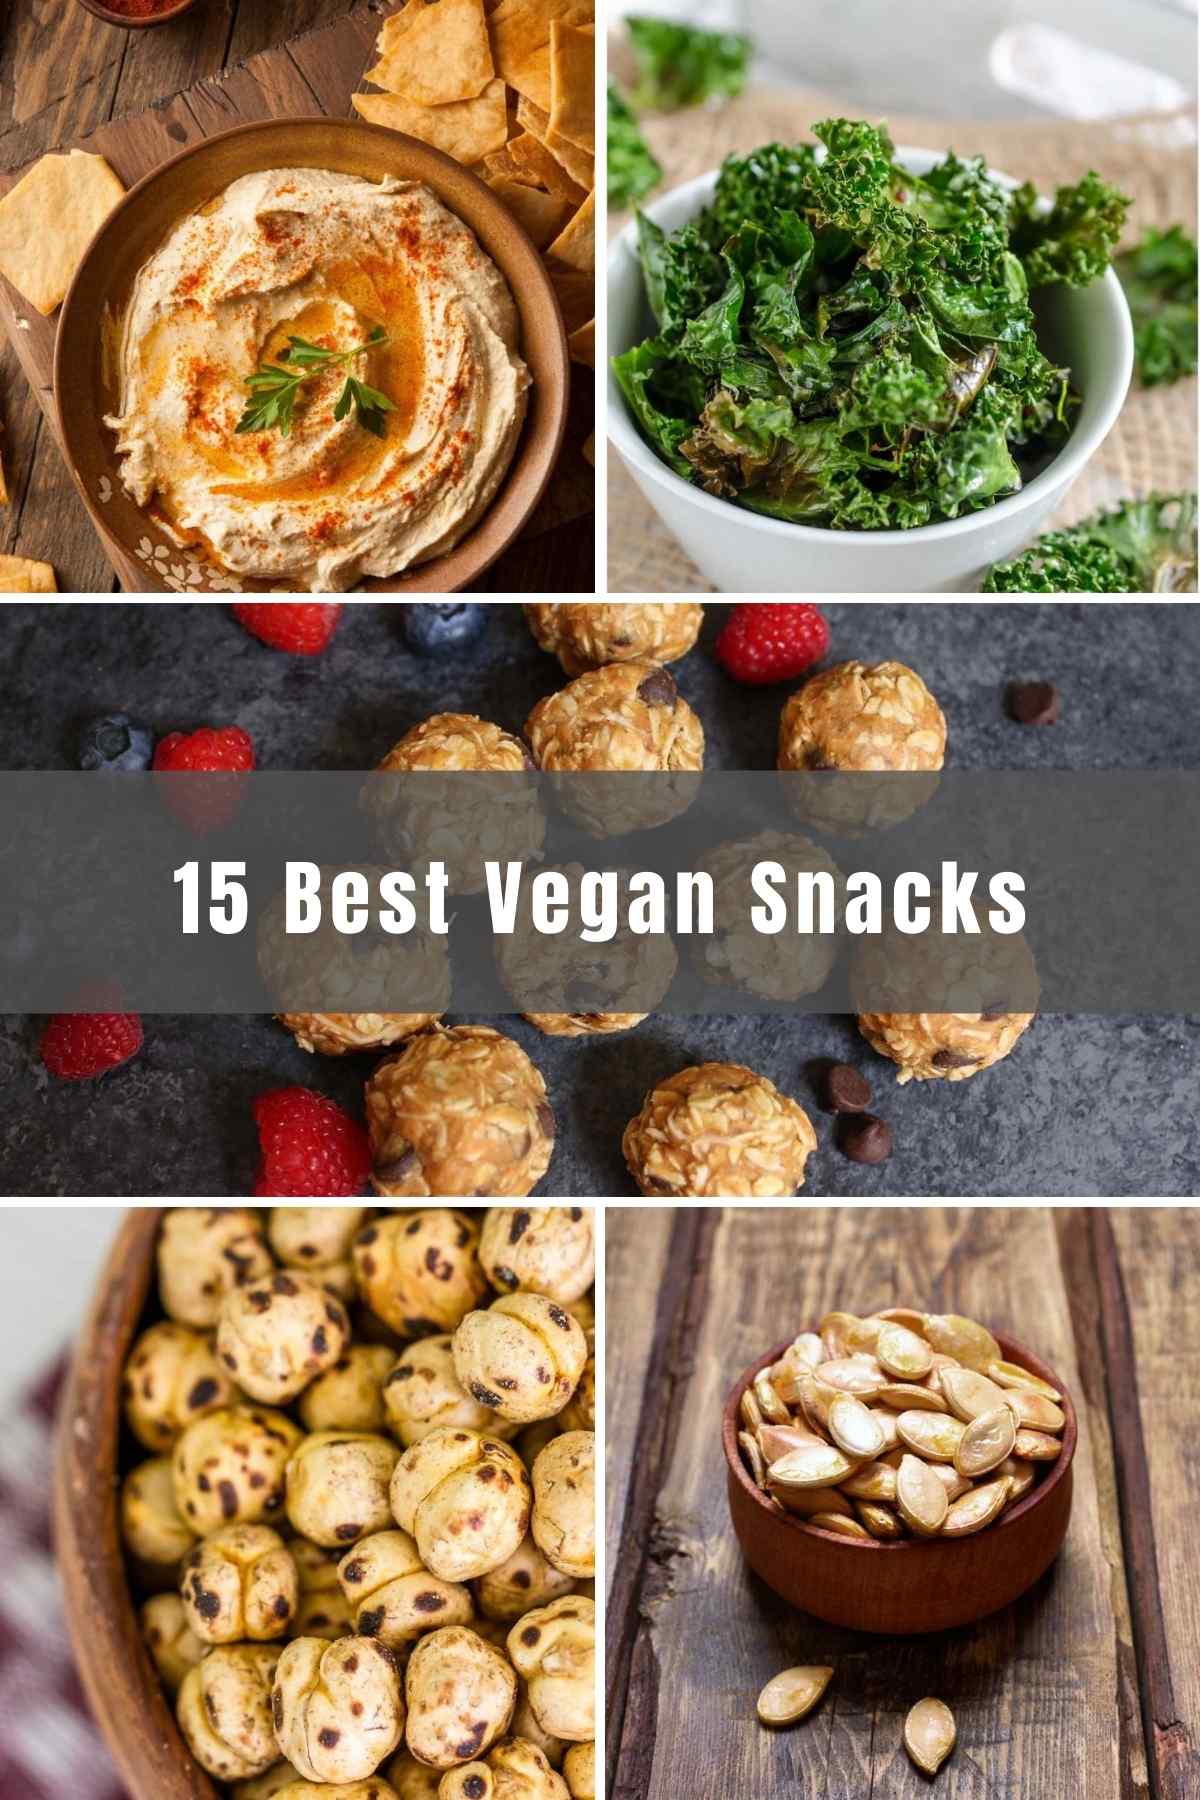 Whether you’re looking for more plant-based foods or new to the vegan diet, here are 15 of the Best Vegan Snack Recipes to satisfy your cravings.